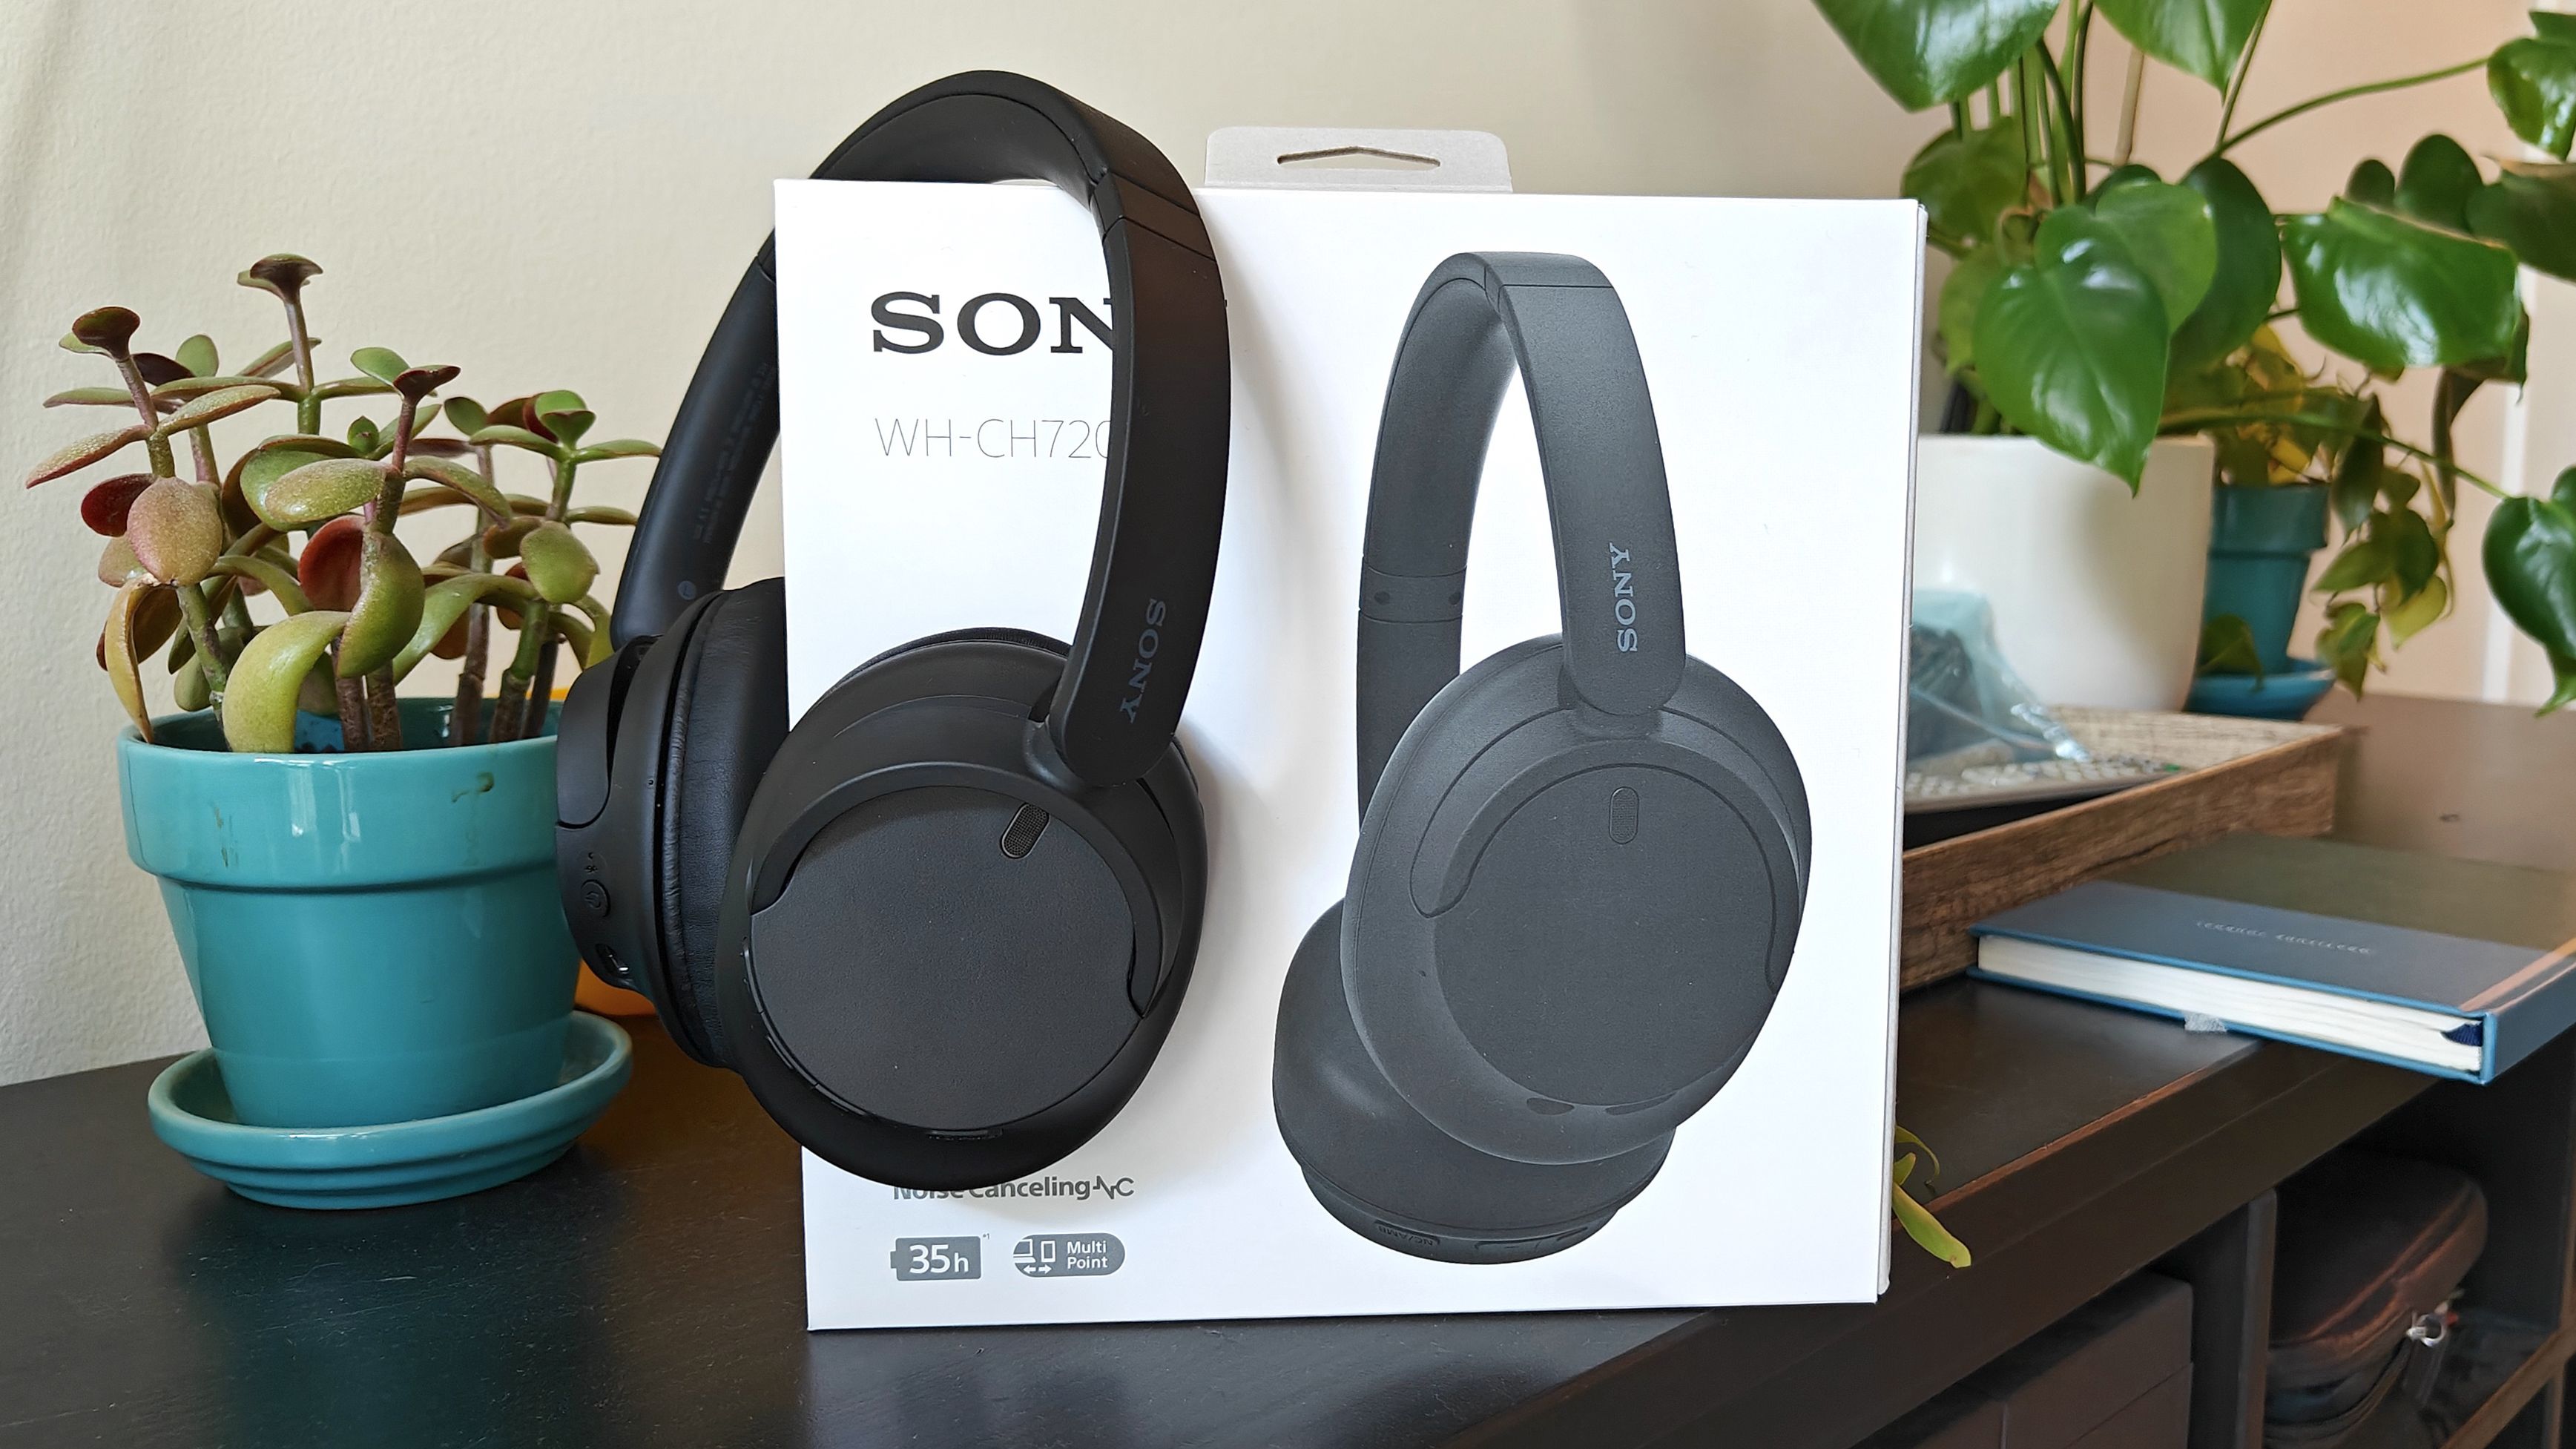 Sony WH-CH720 Noise Cancelling Over-Ear Headphones Black - HiFi Corporation